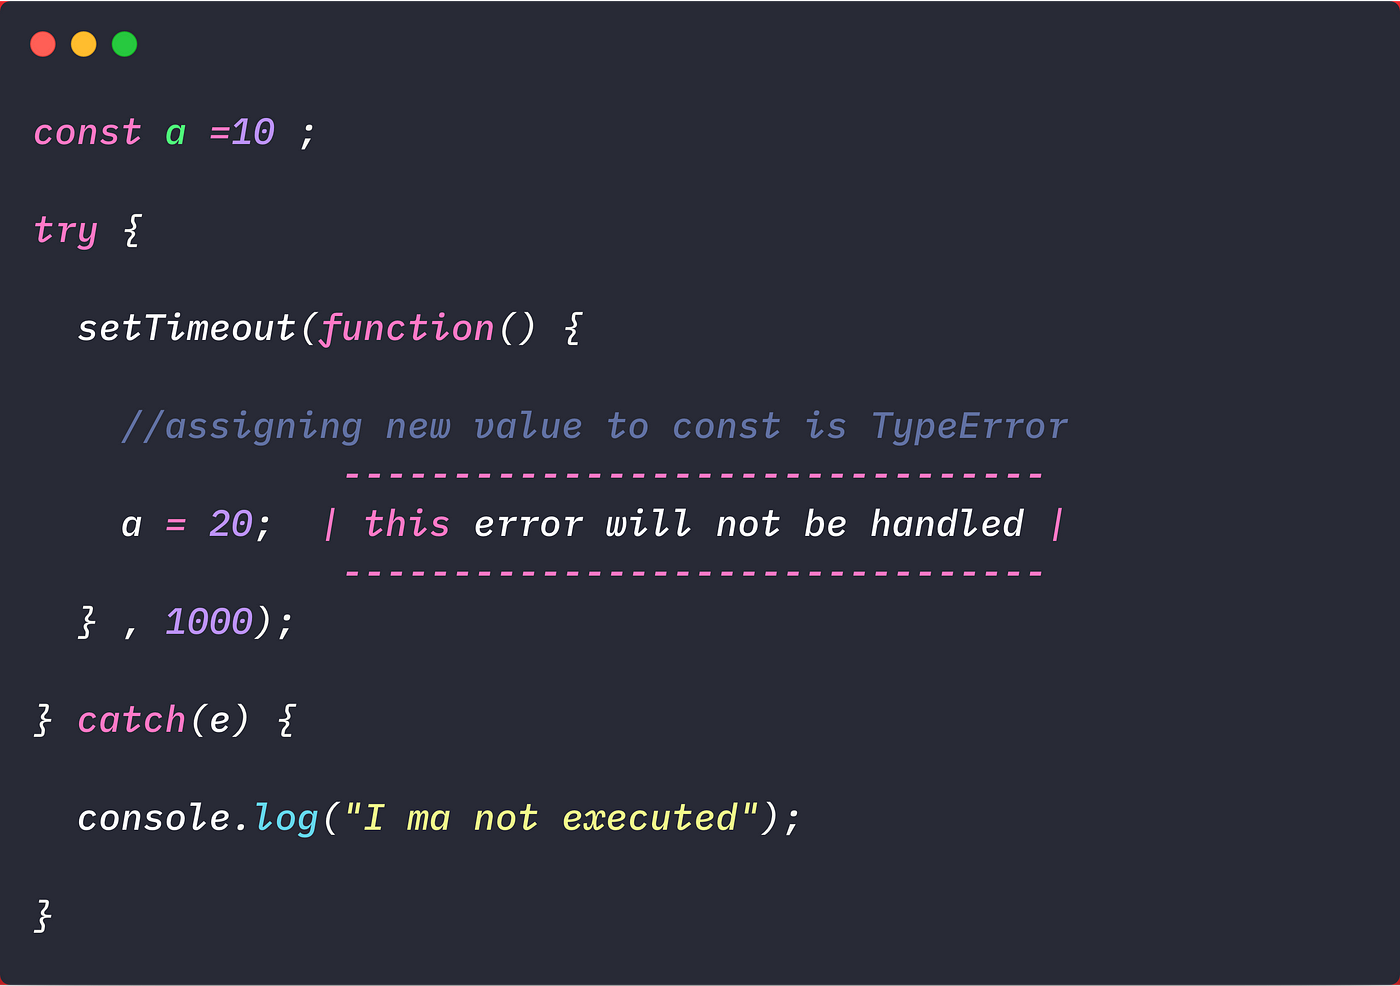 What is Error Handling in JavaScript and How to do it with Examples?